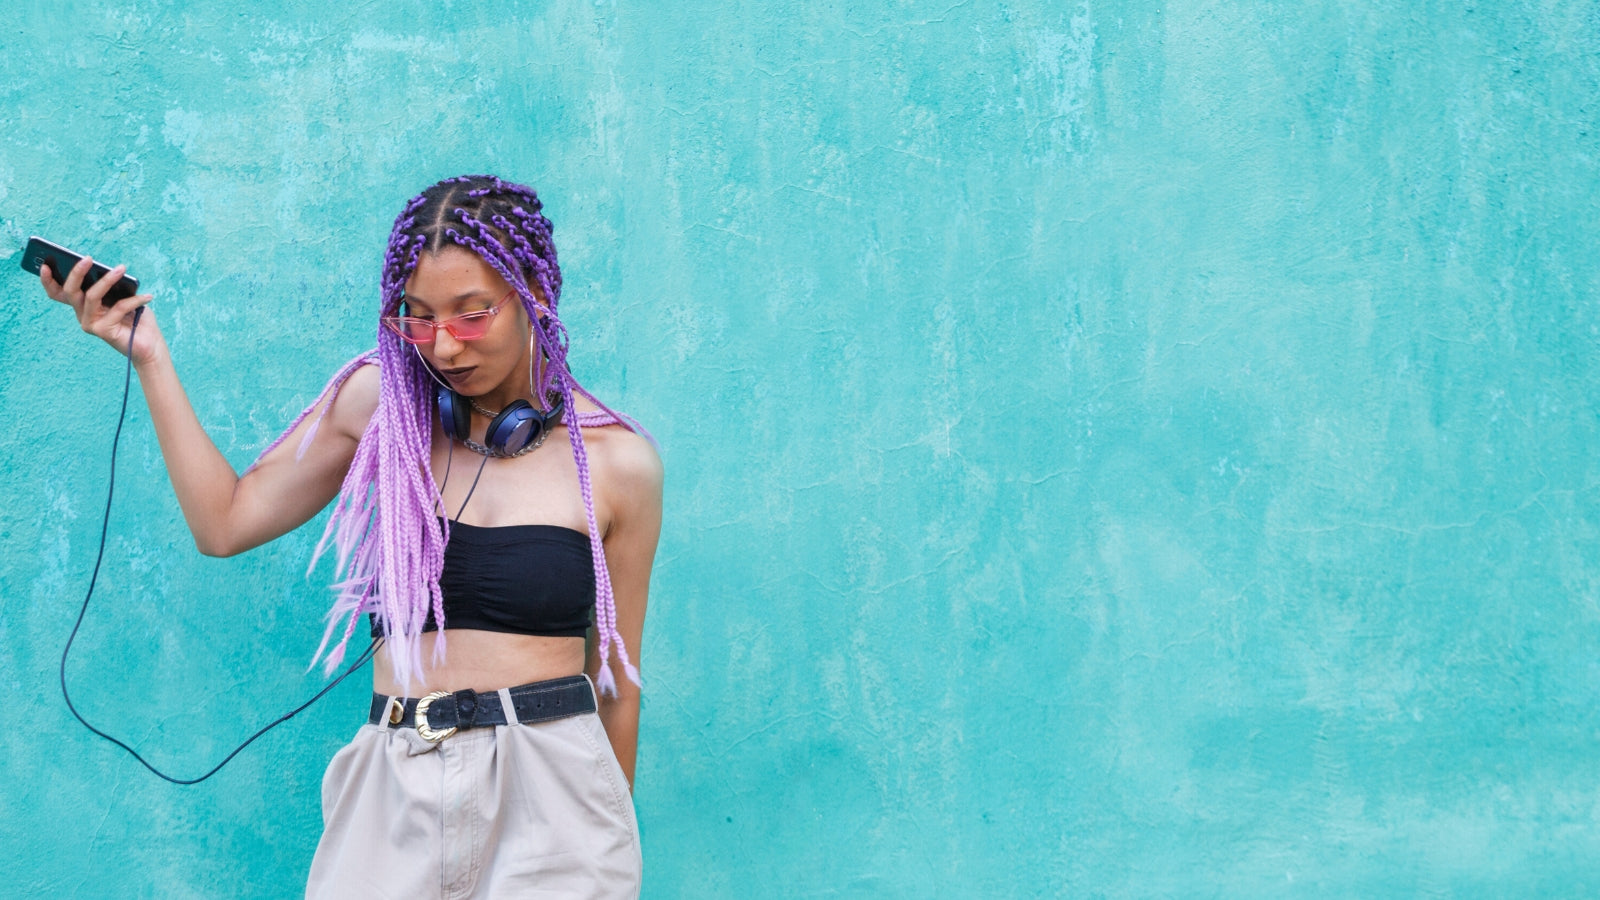 Trendy young lady in a crop top with purple braided hair